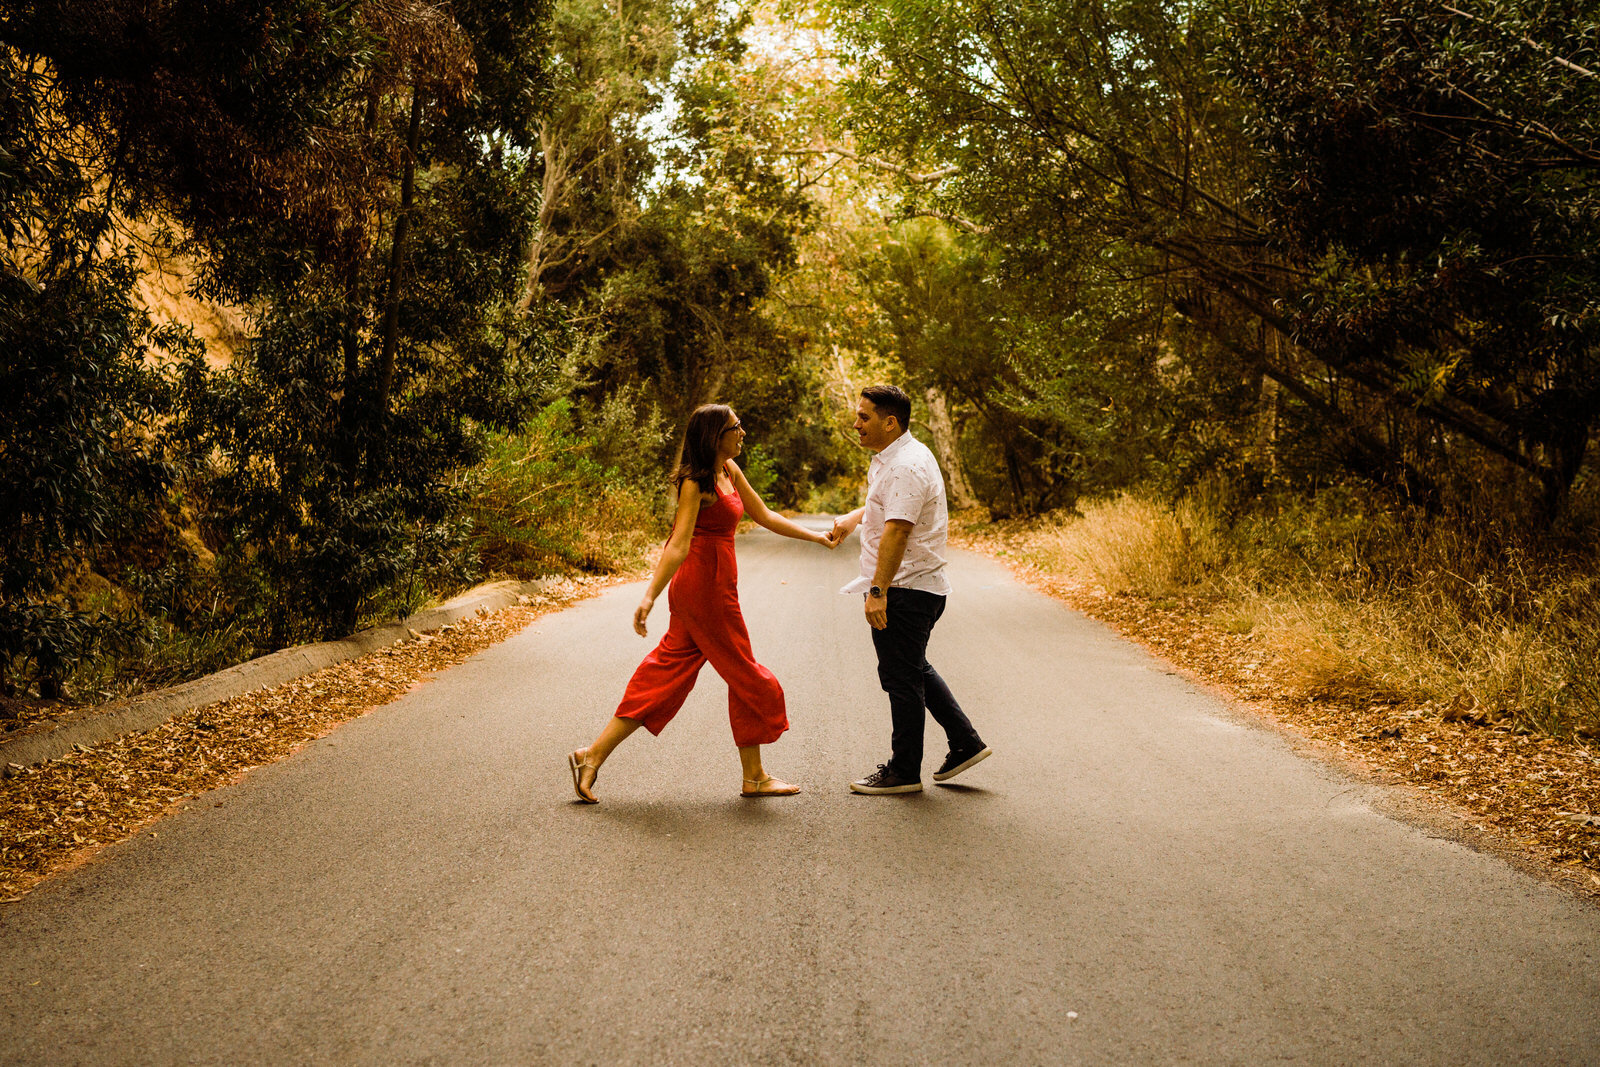 Playful engagement photos at Franklin Canyon Park near Beverly Hills